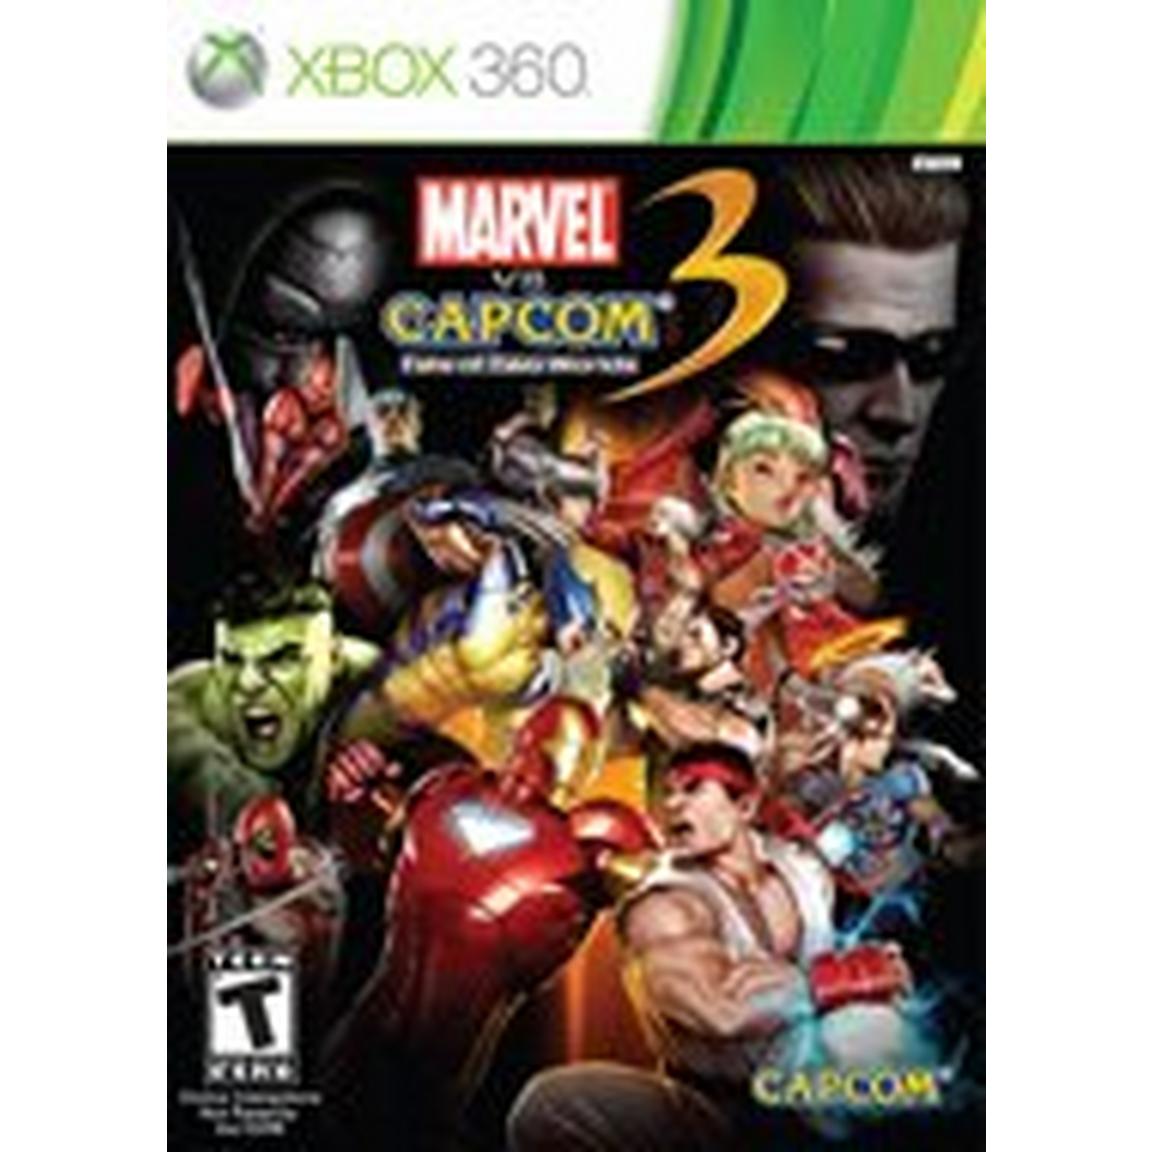 Marvel vs.Capcom 3: Fate of Two Worlds - Xbox 360, Pre-Owned